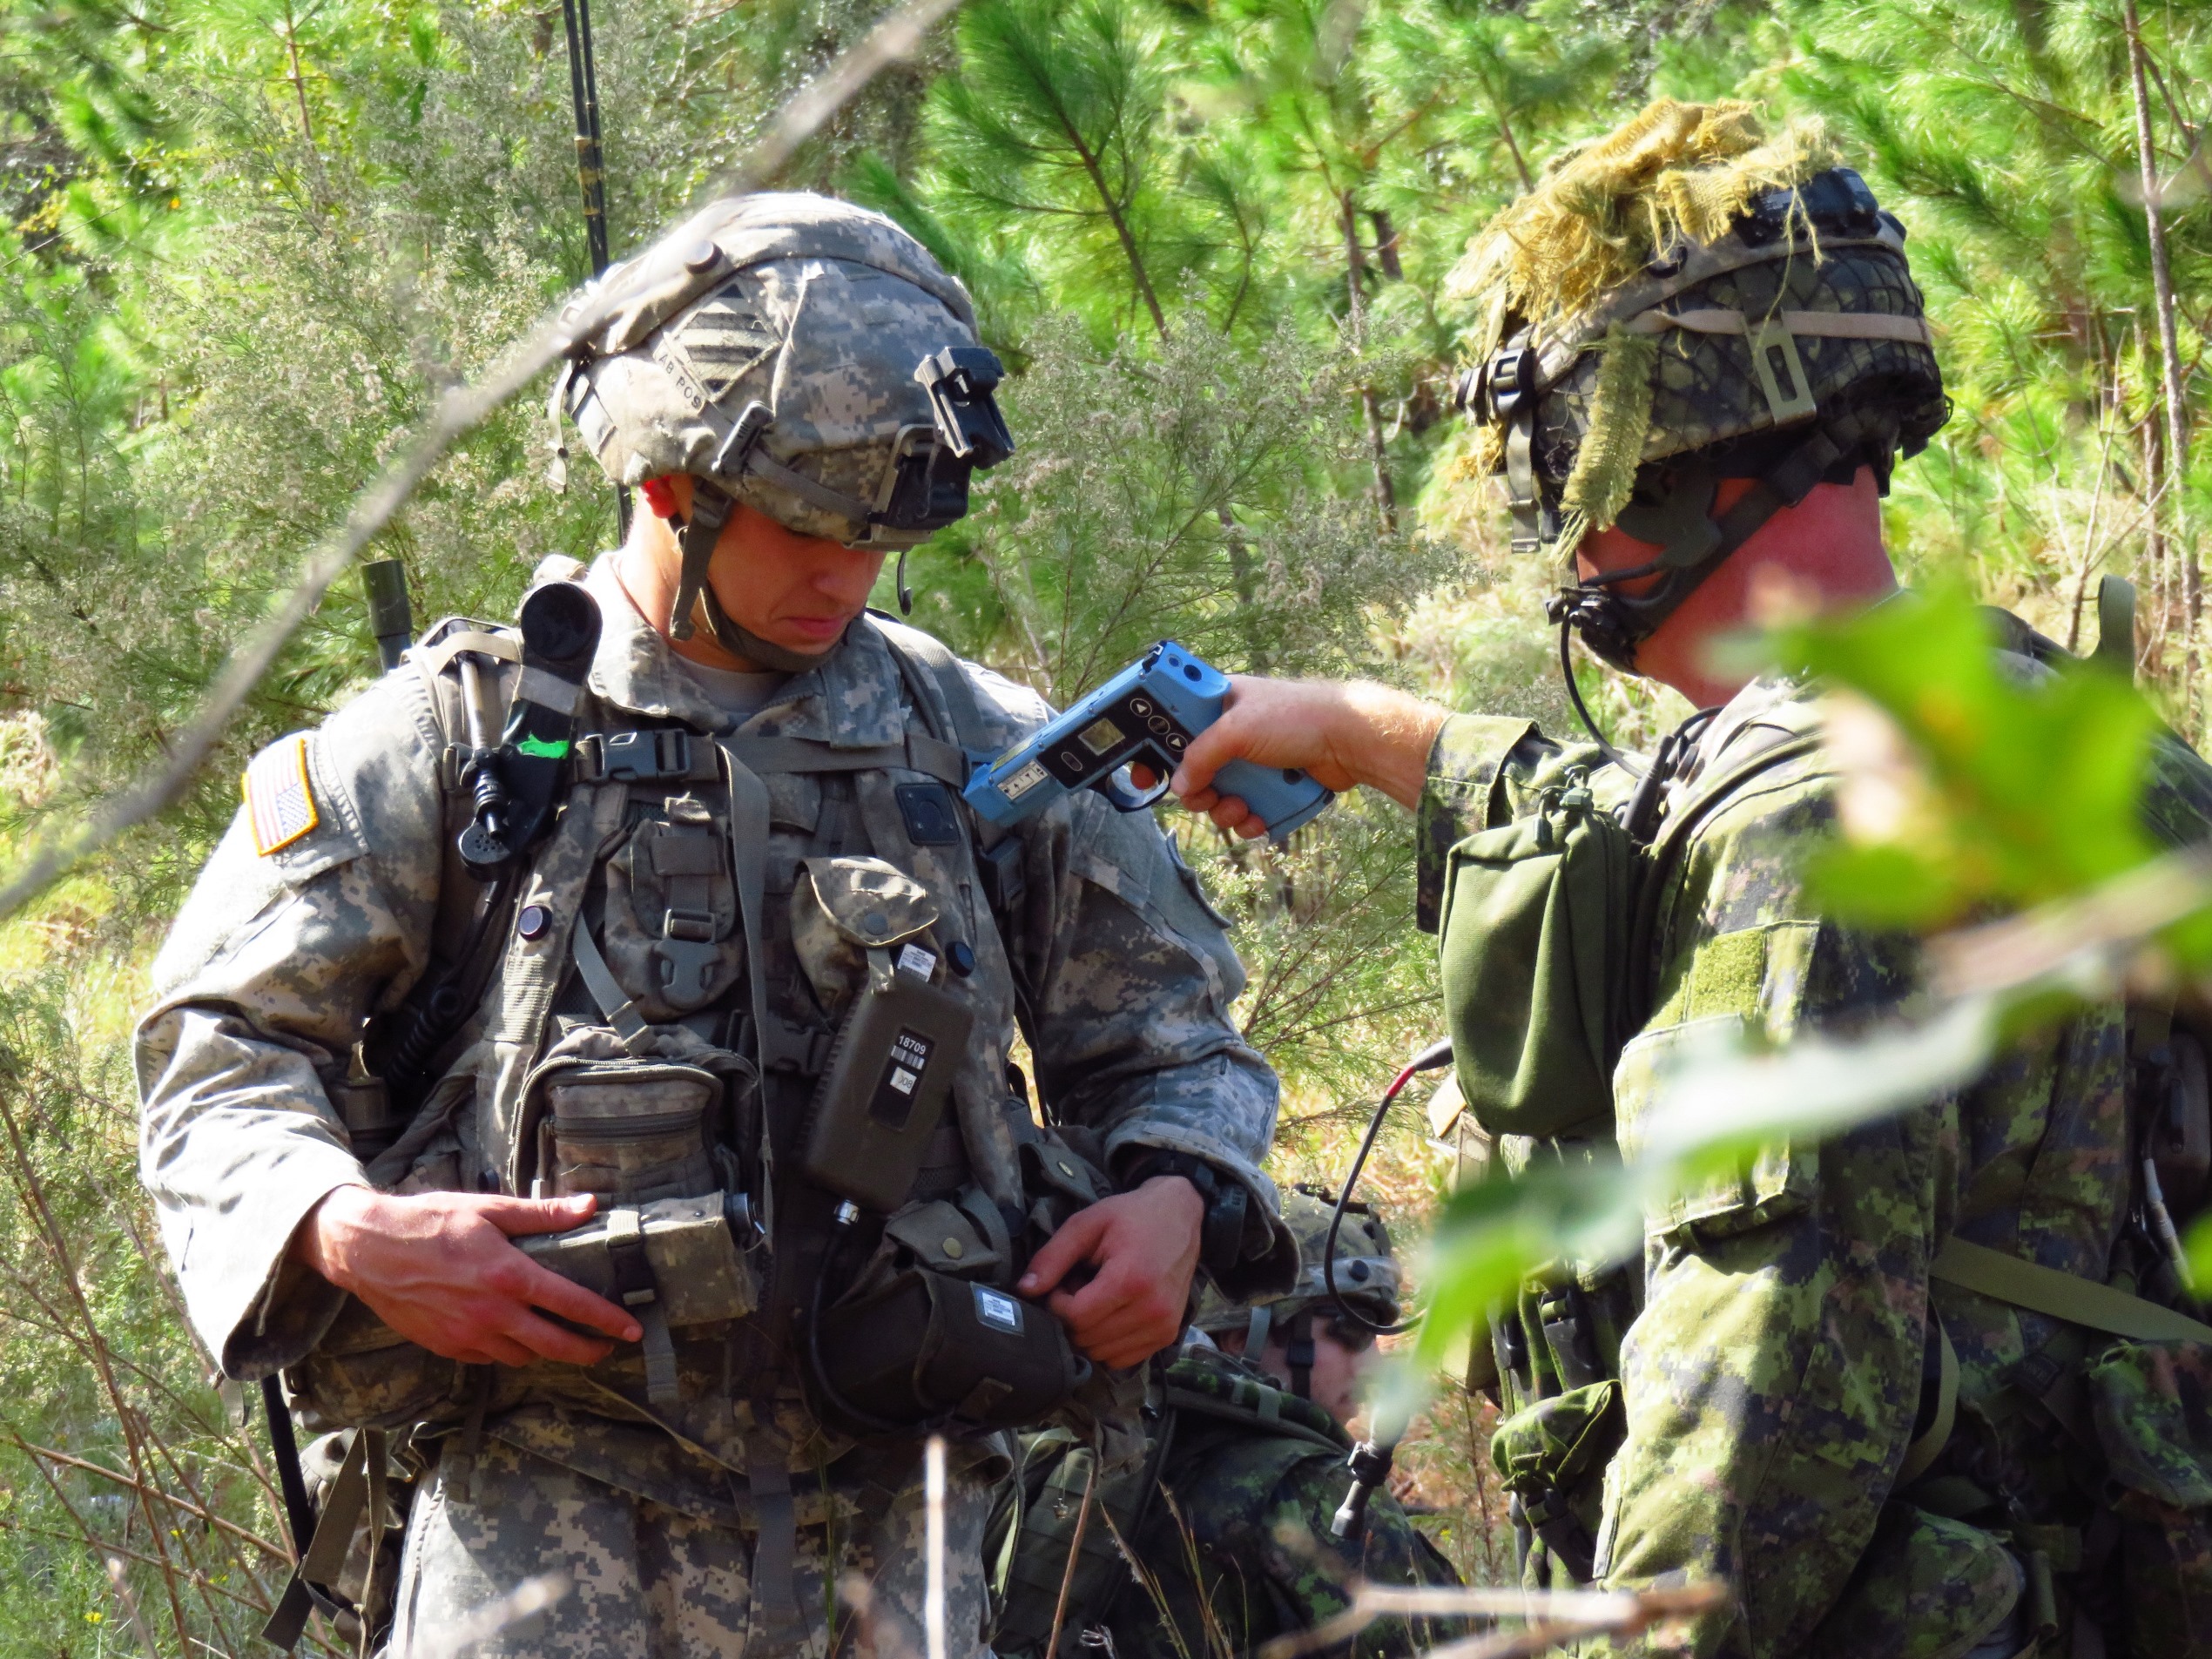 A Canadian soldier activates the multiple integrated laser engagement systems (MILES) on a U.S. Soldier during the U.S. Joint Staff-led Exercise BOLD QUEST, a demonstration and assessment that took place from October 24 to November 3, 2016 in Fort Stewart, Georgia. 